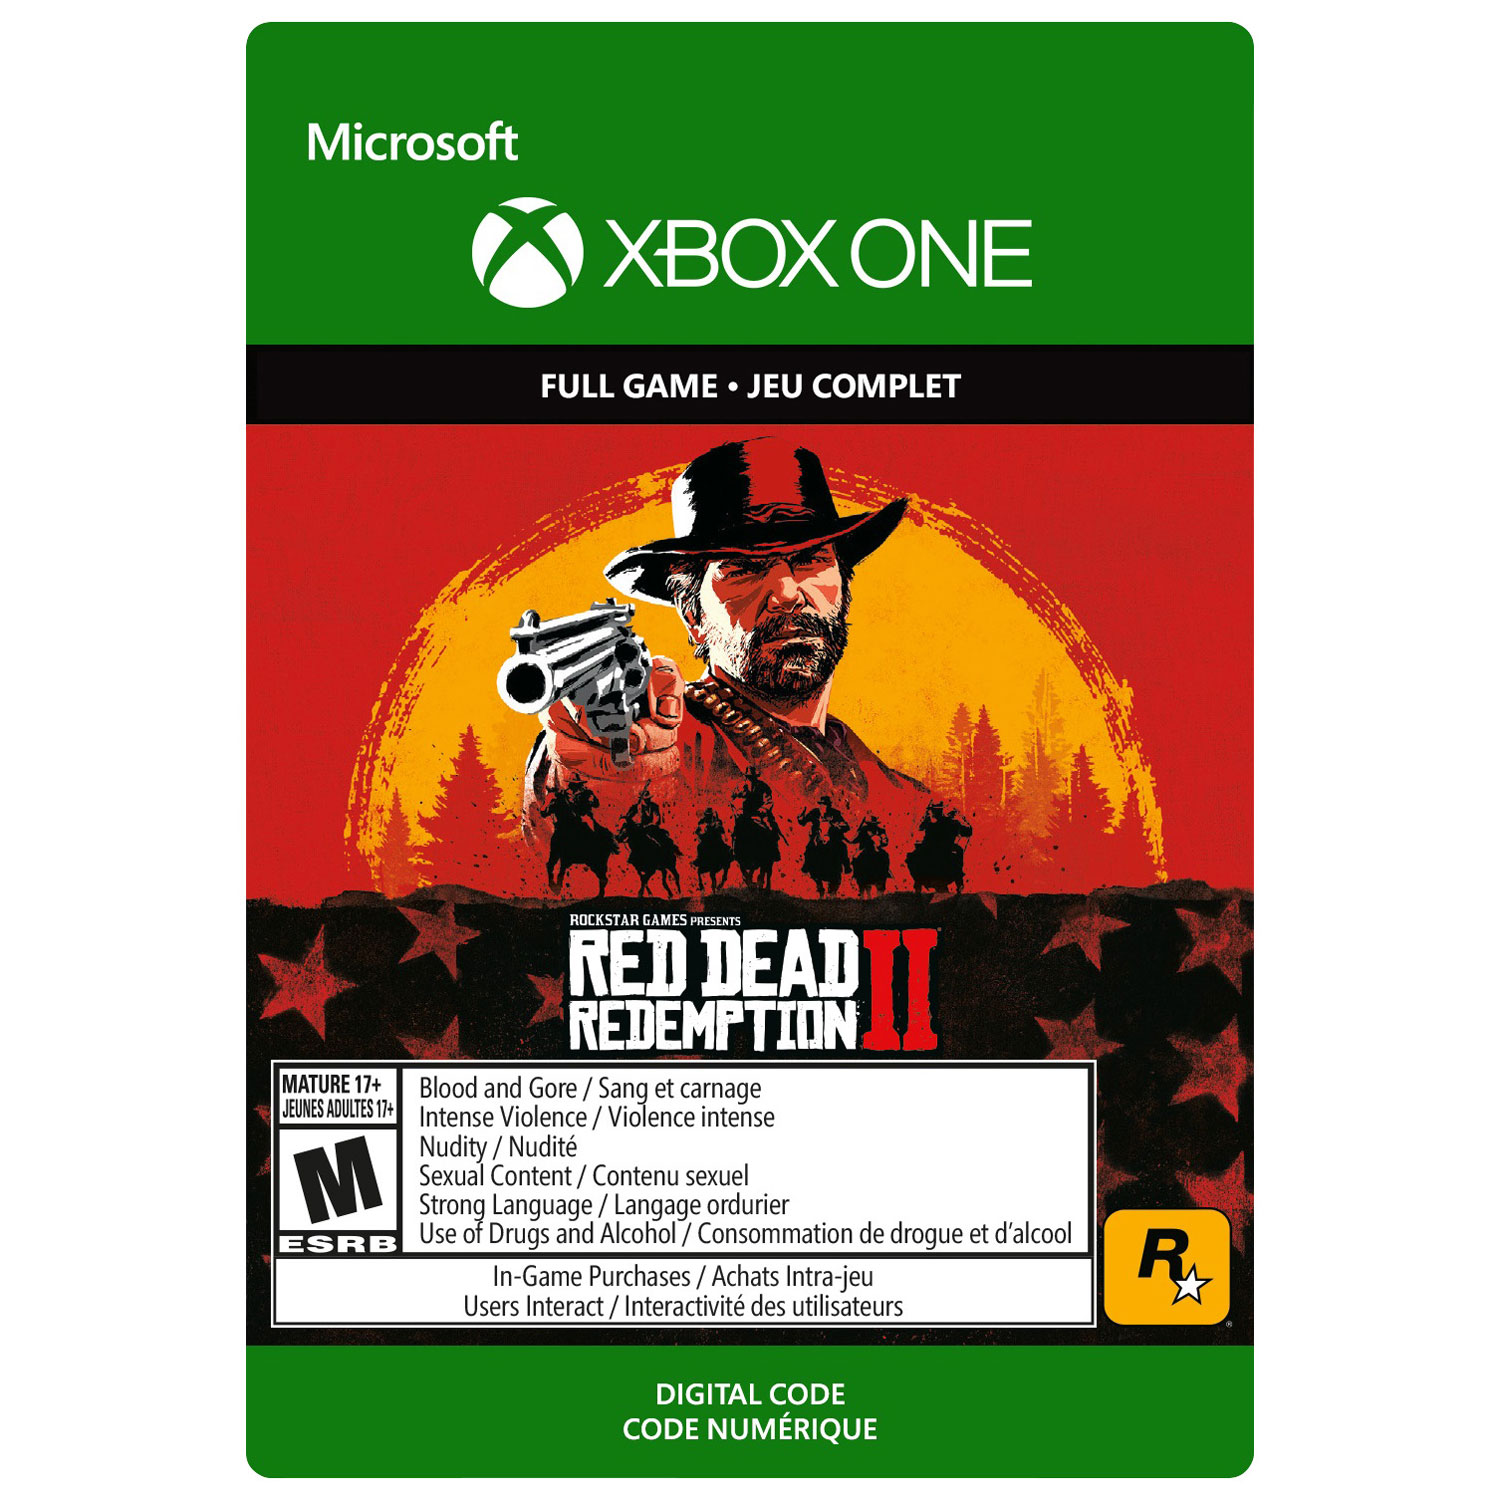 Red Dead Redemption 2 (Xbox One) - Digital Download